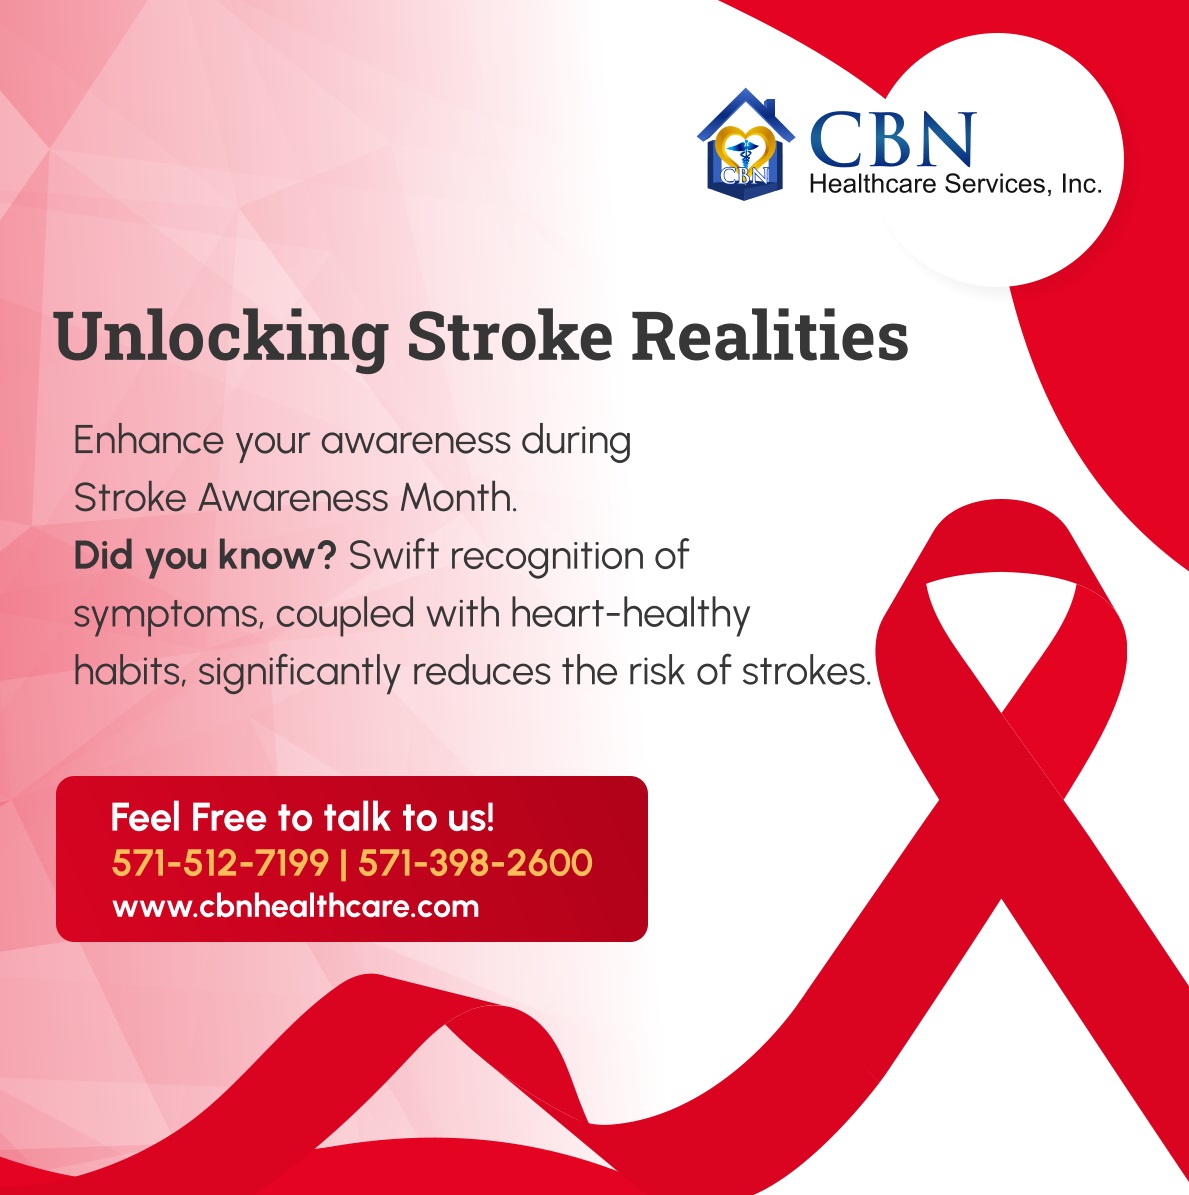 Shed light on the path to stroke prevention. May is dedicated to awareness, knowledge, and action. Empower yourself with insights to protect against strokes. 

#StrokeAwareness #KnowledgeIsPower #PreventStrokes